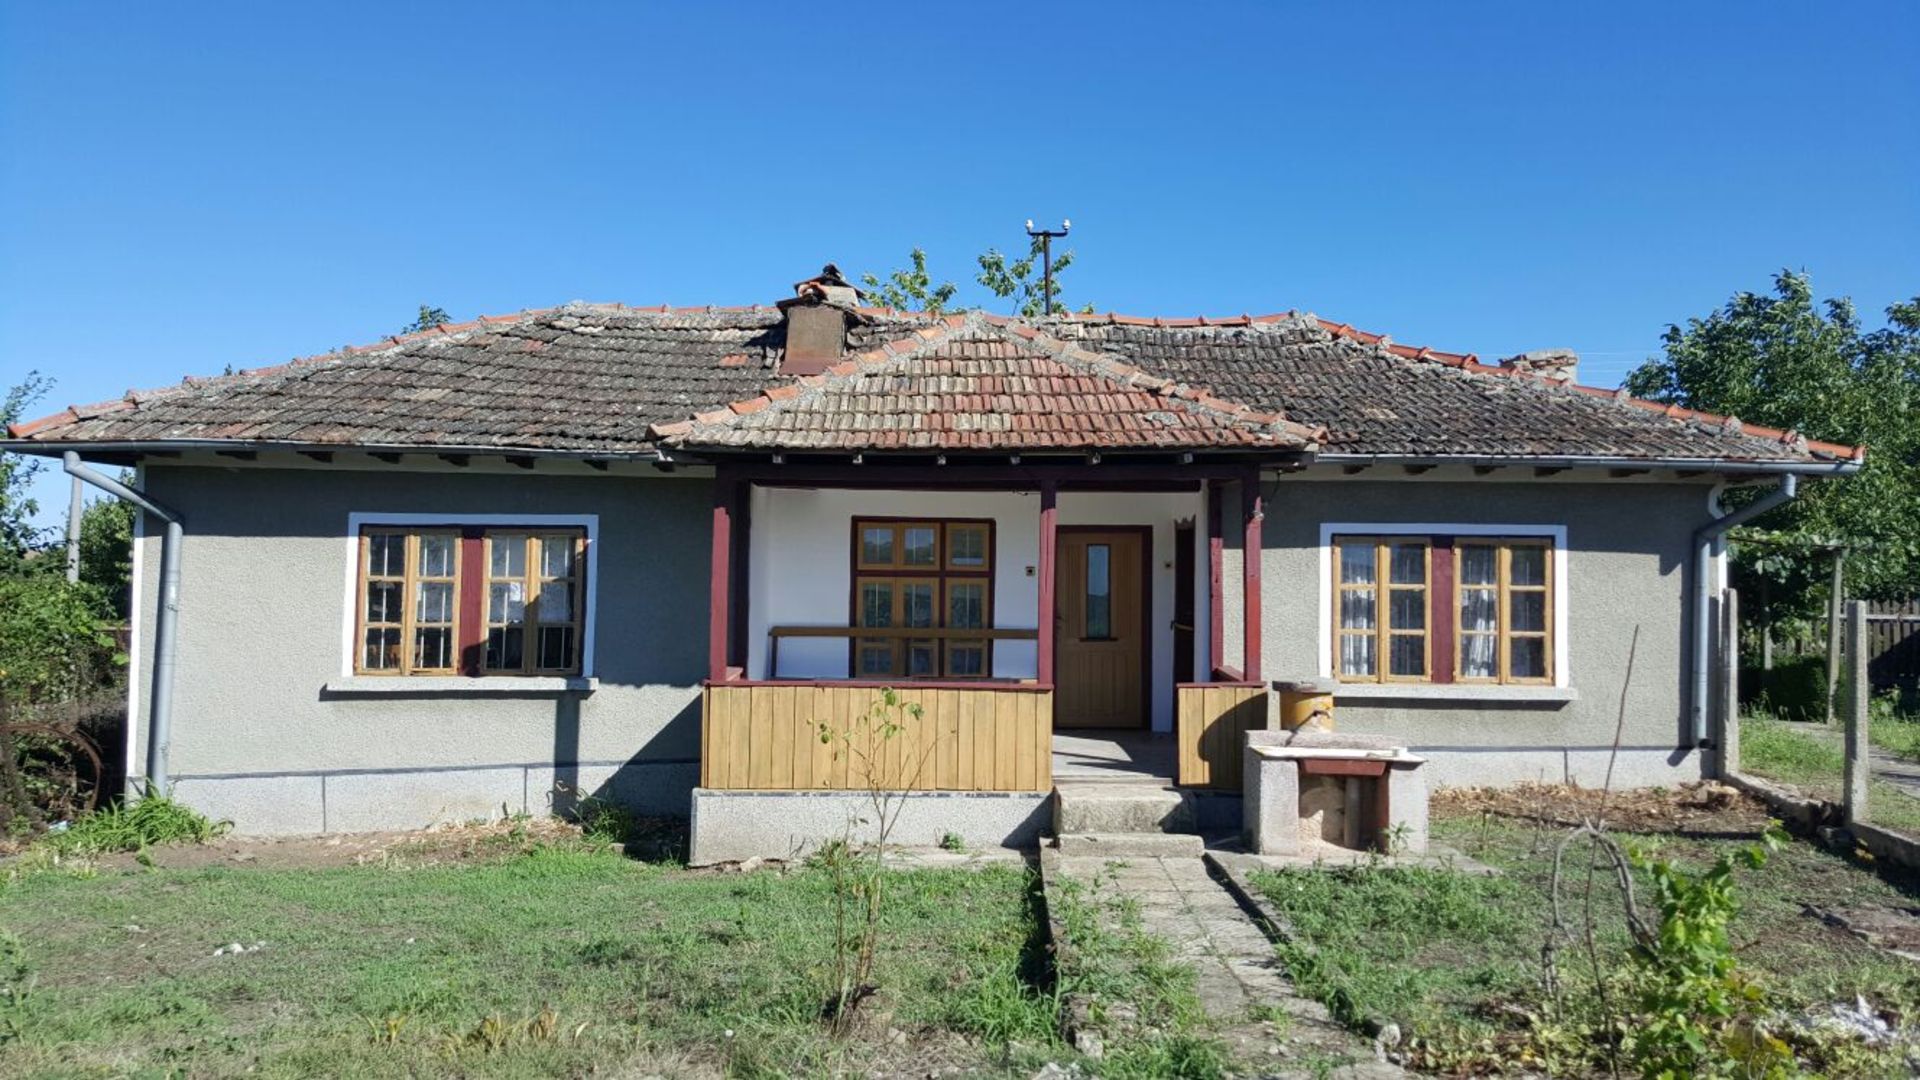 WISHING WELL COTTAGE Geshanovo, Dobrich, Bulgaria, 36 miles from Sea!